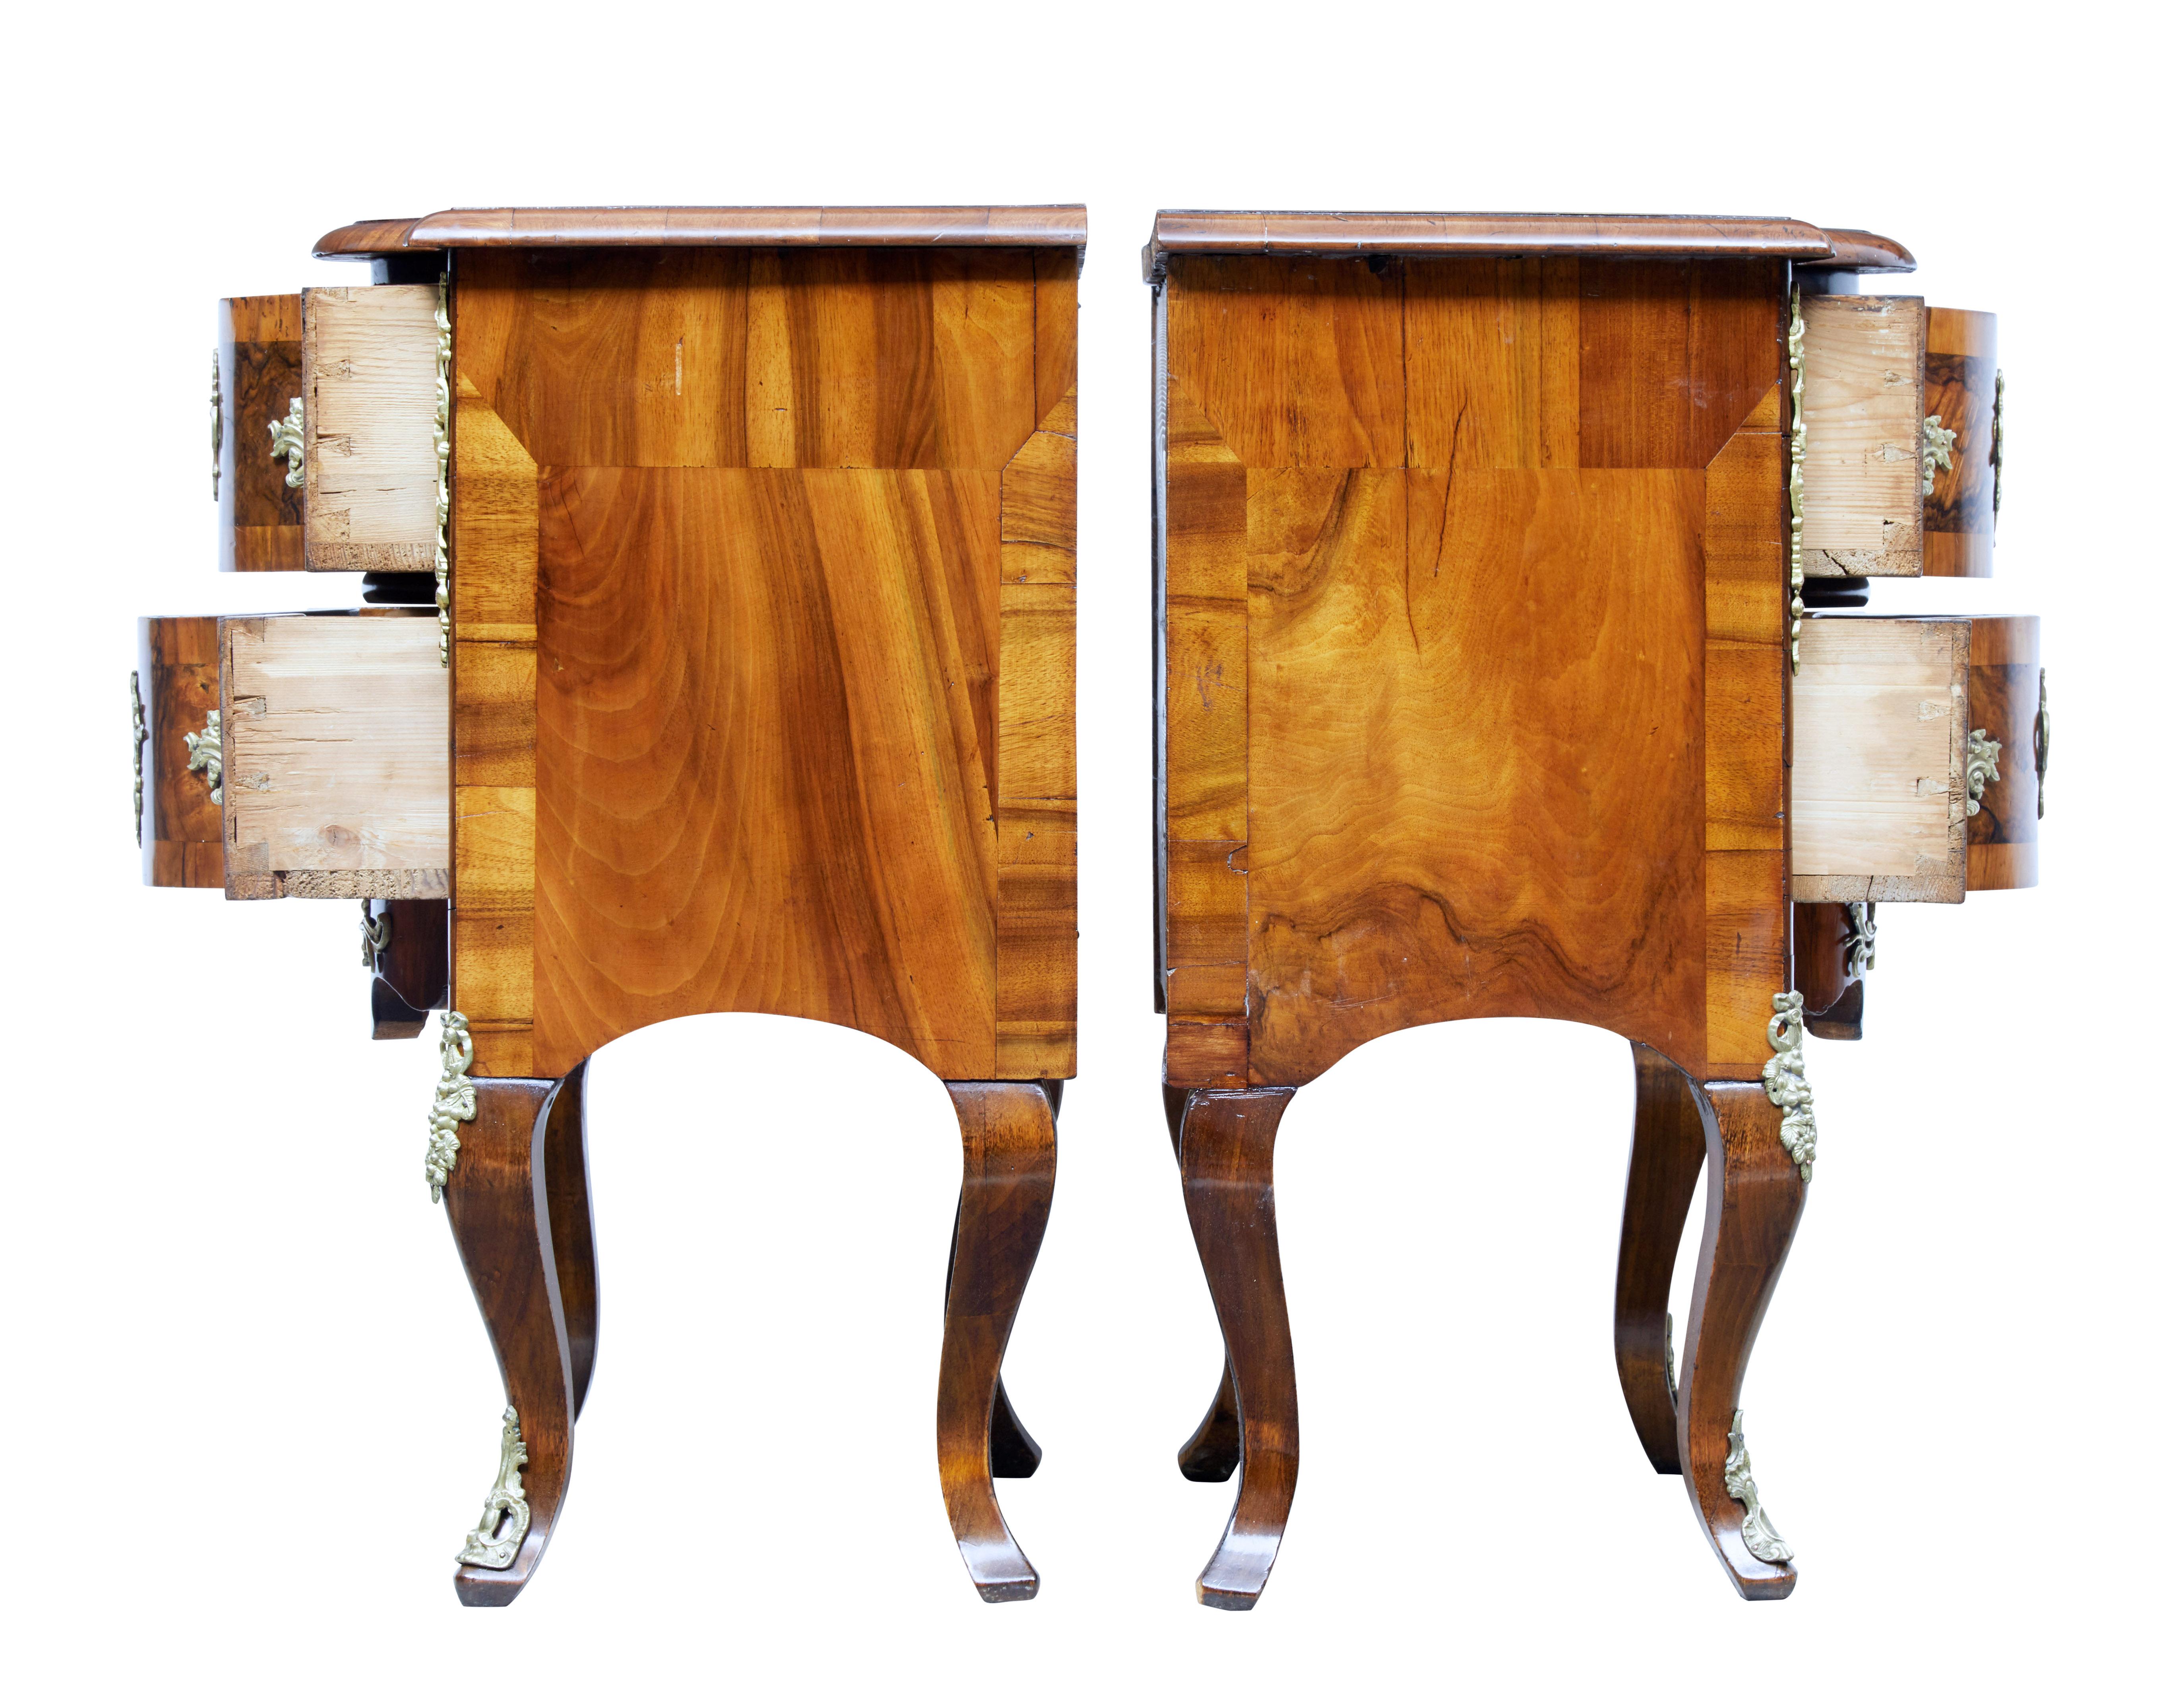 Baroque Pair of Small Mid-19th Century Continental Walnut Commodes